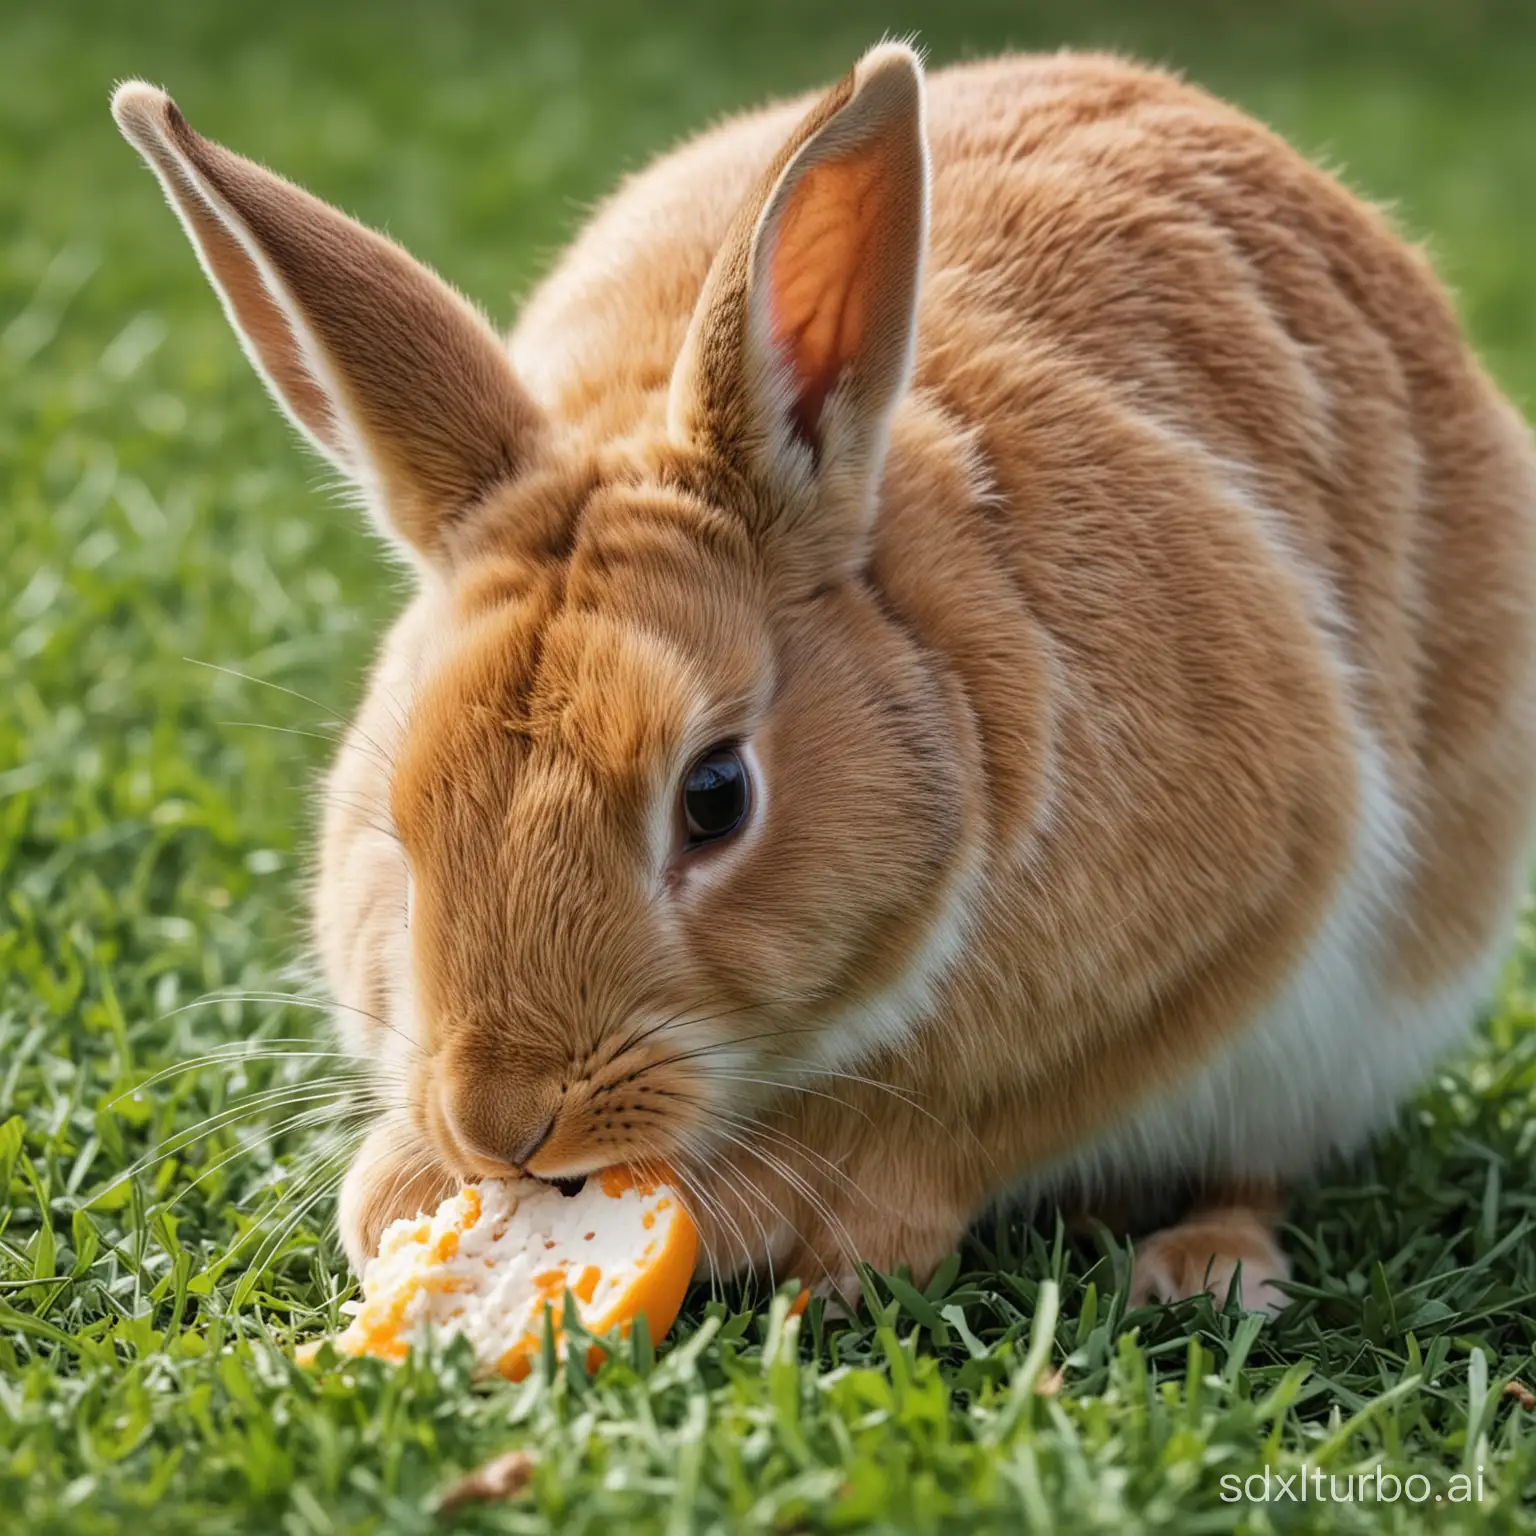 Rabbit-Eating-Fresh-Greens-in-a-Meadow